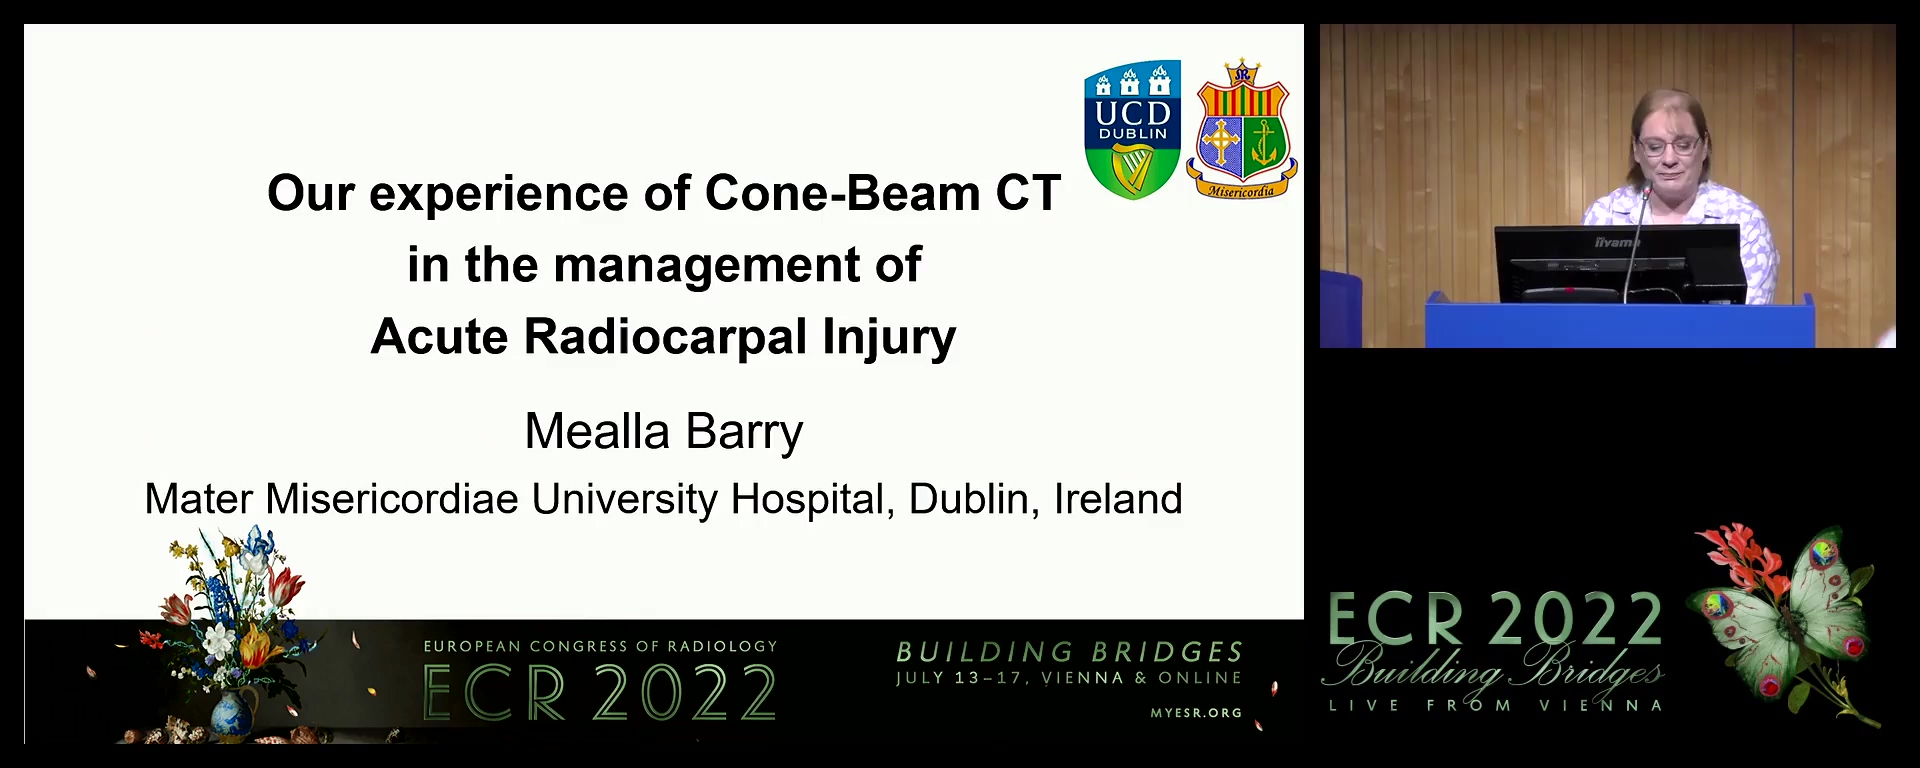 Our experience of cone-beam CT in the management of acute radiocarpal injury - Mealla Barry, Dublin 7 / IE